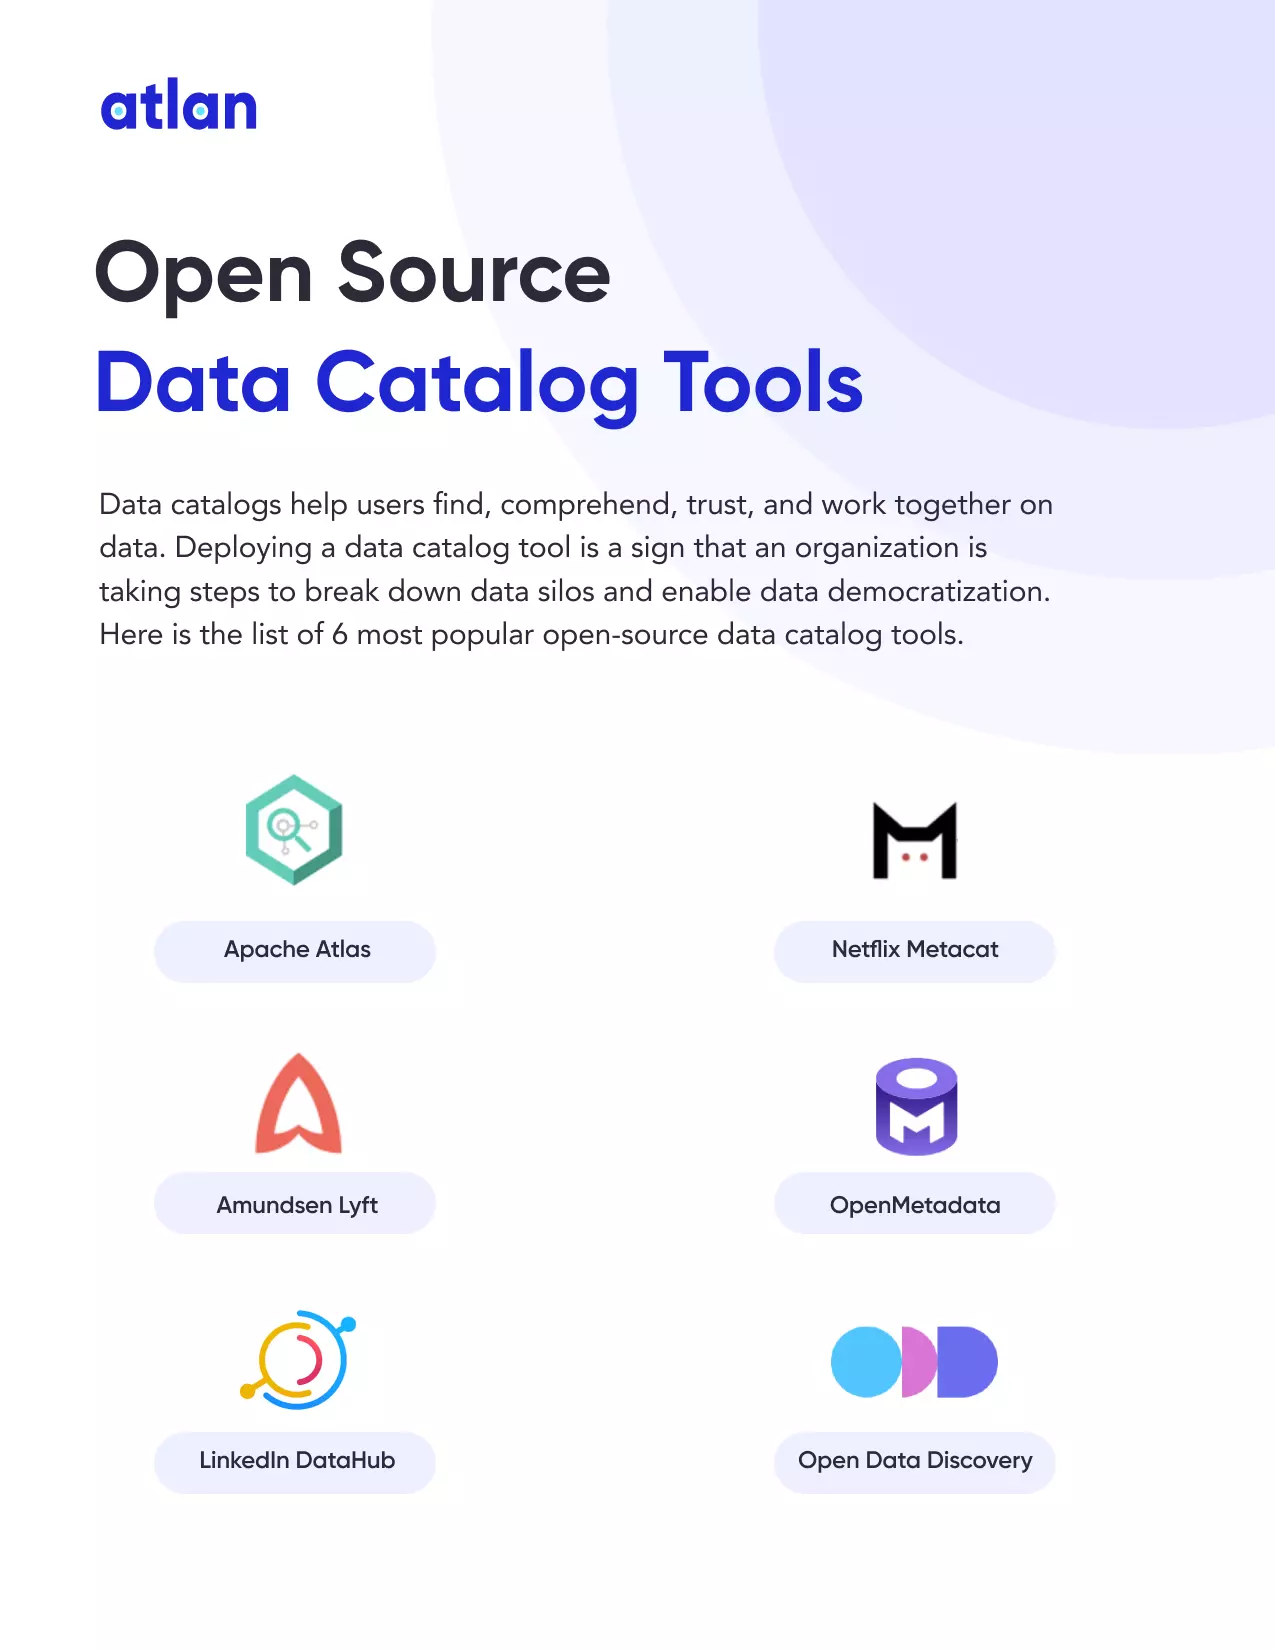 List of the 6 most popular open-source data catalog tools